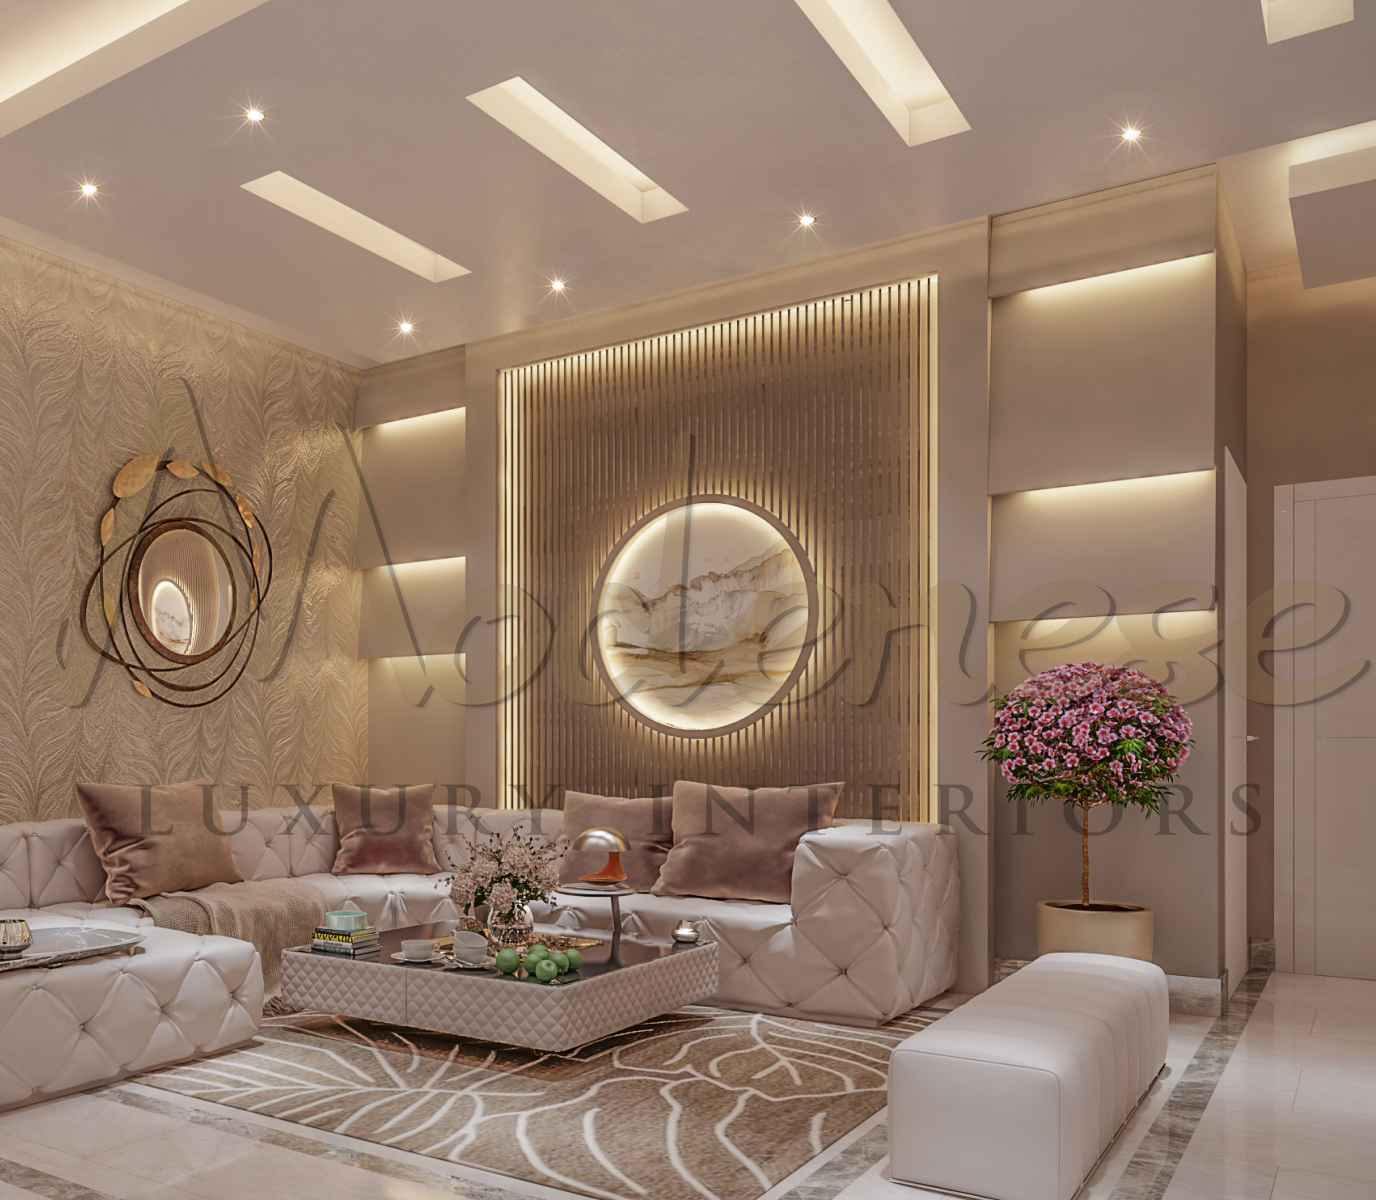 Refined style, exclusive design of living room design. Bespoke luxury interior designs for the most luxurious private projects. Customized Italian Furniture